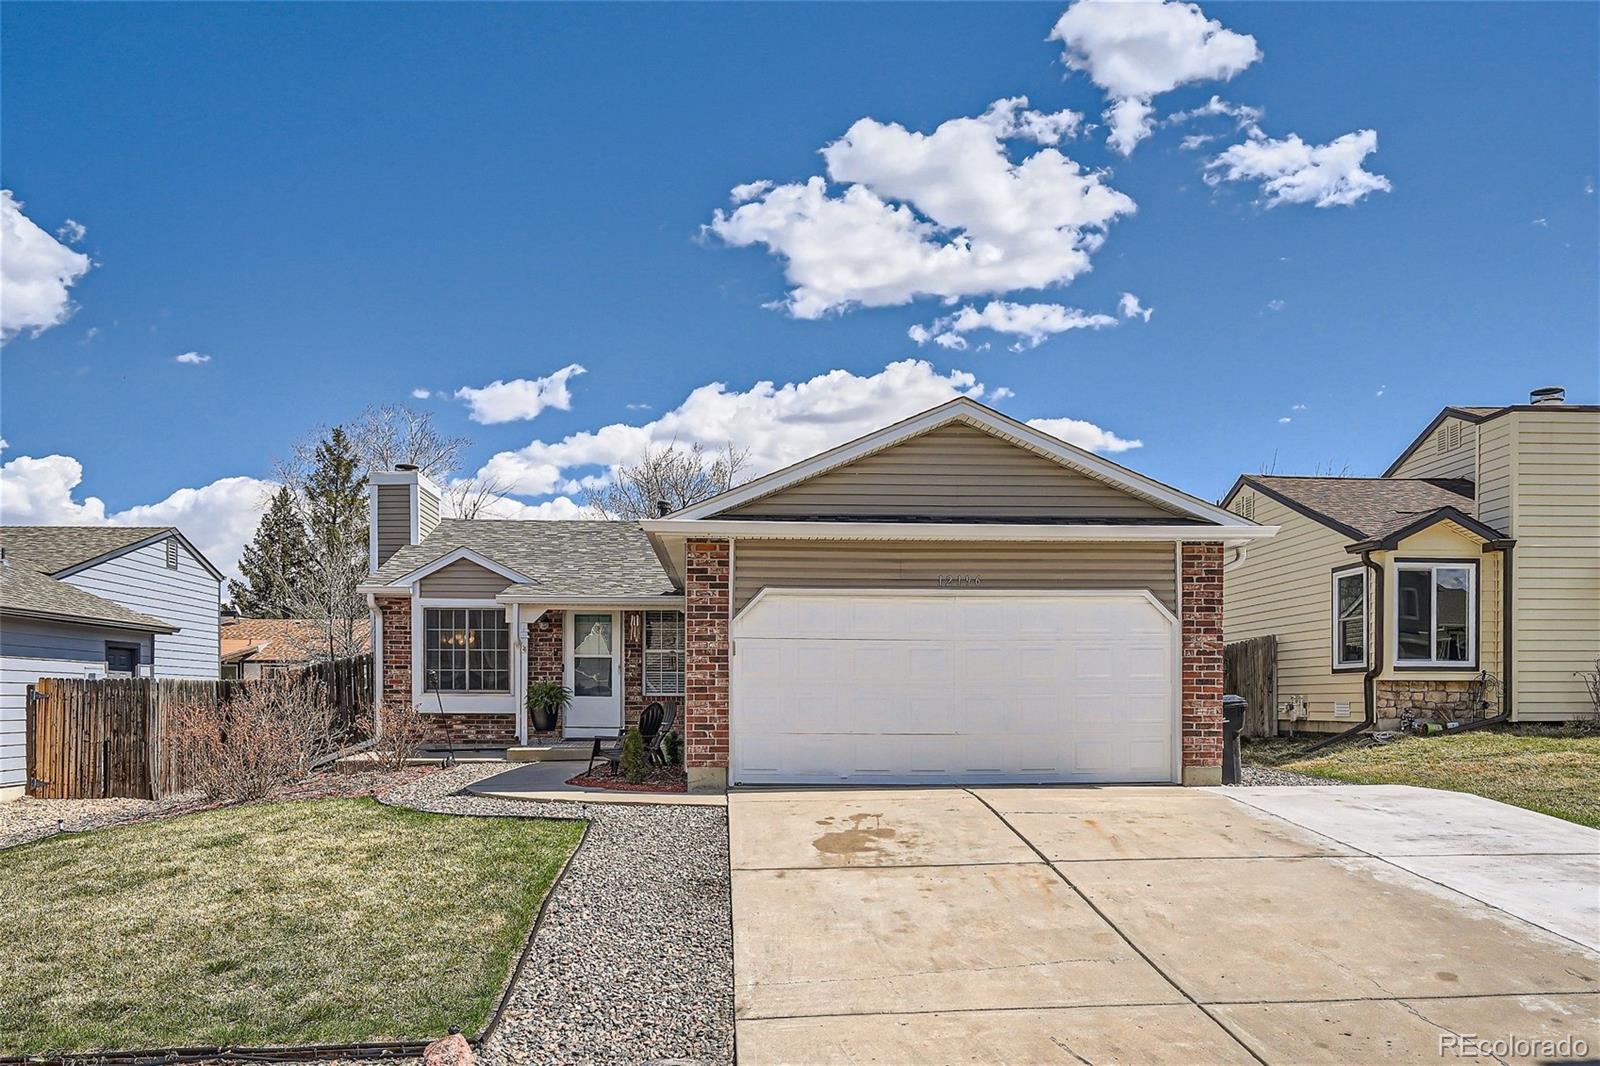 12196  elm way, thornton sold home. Closed on 2024-05-06 for $499,500.